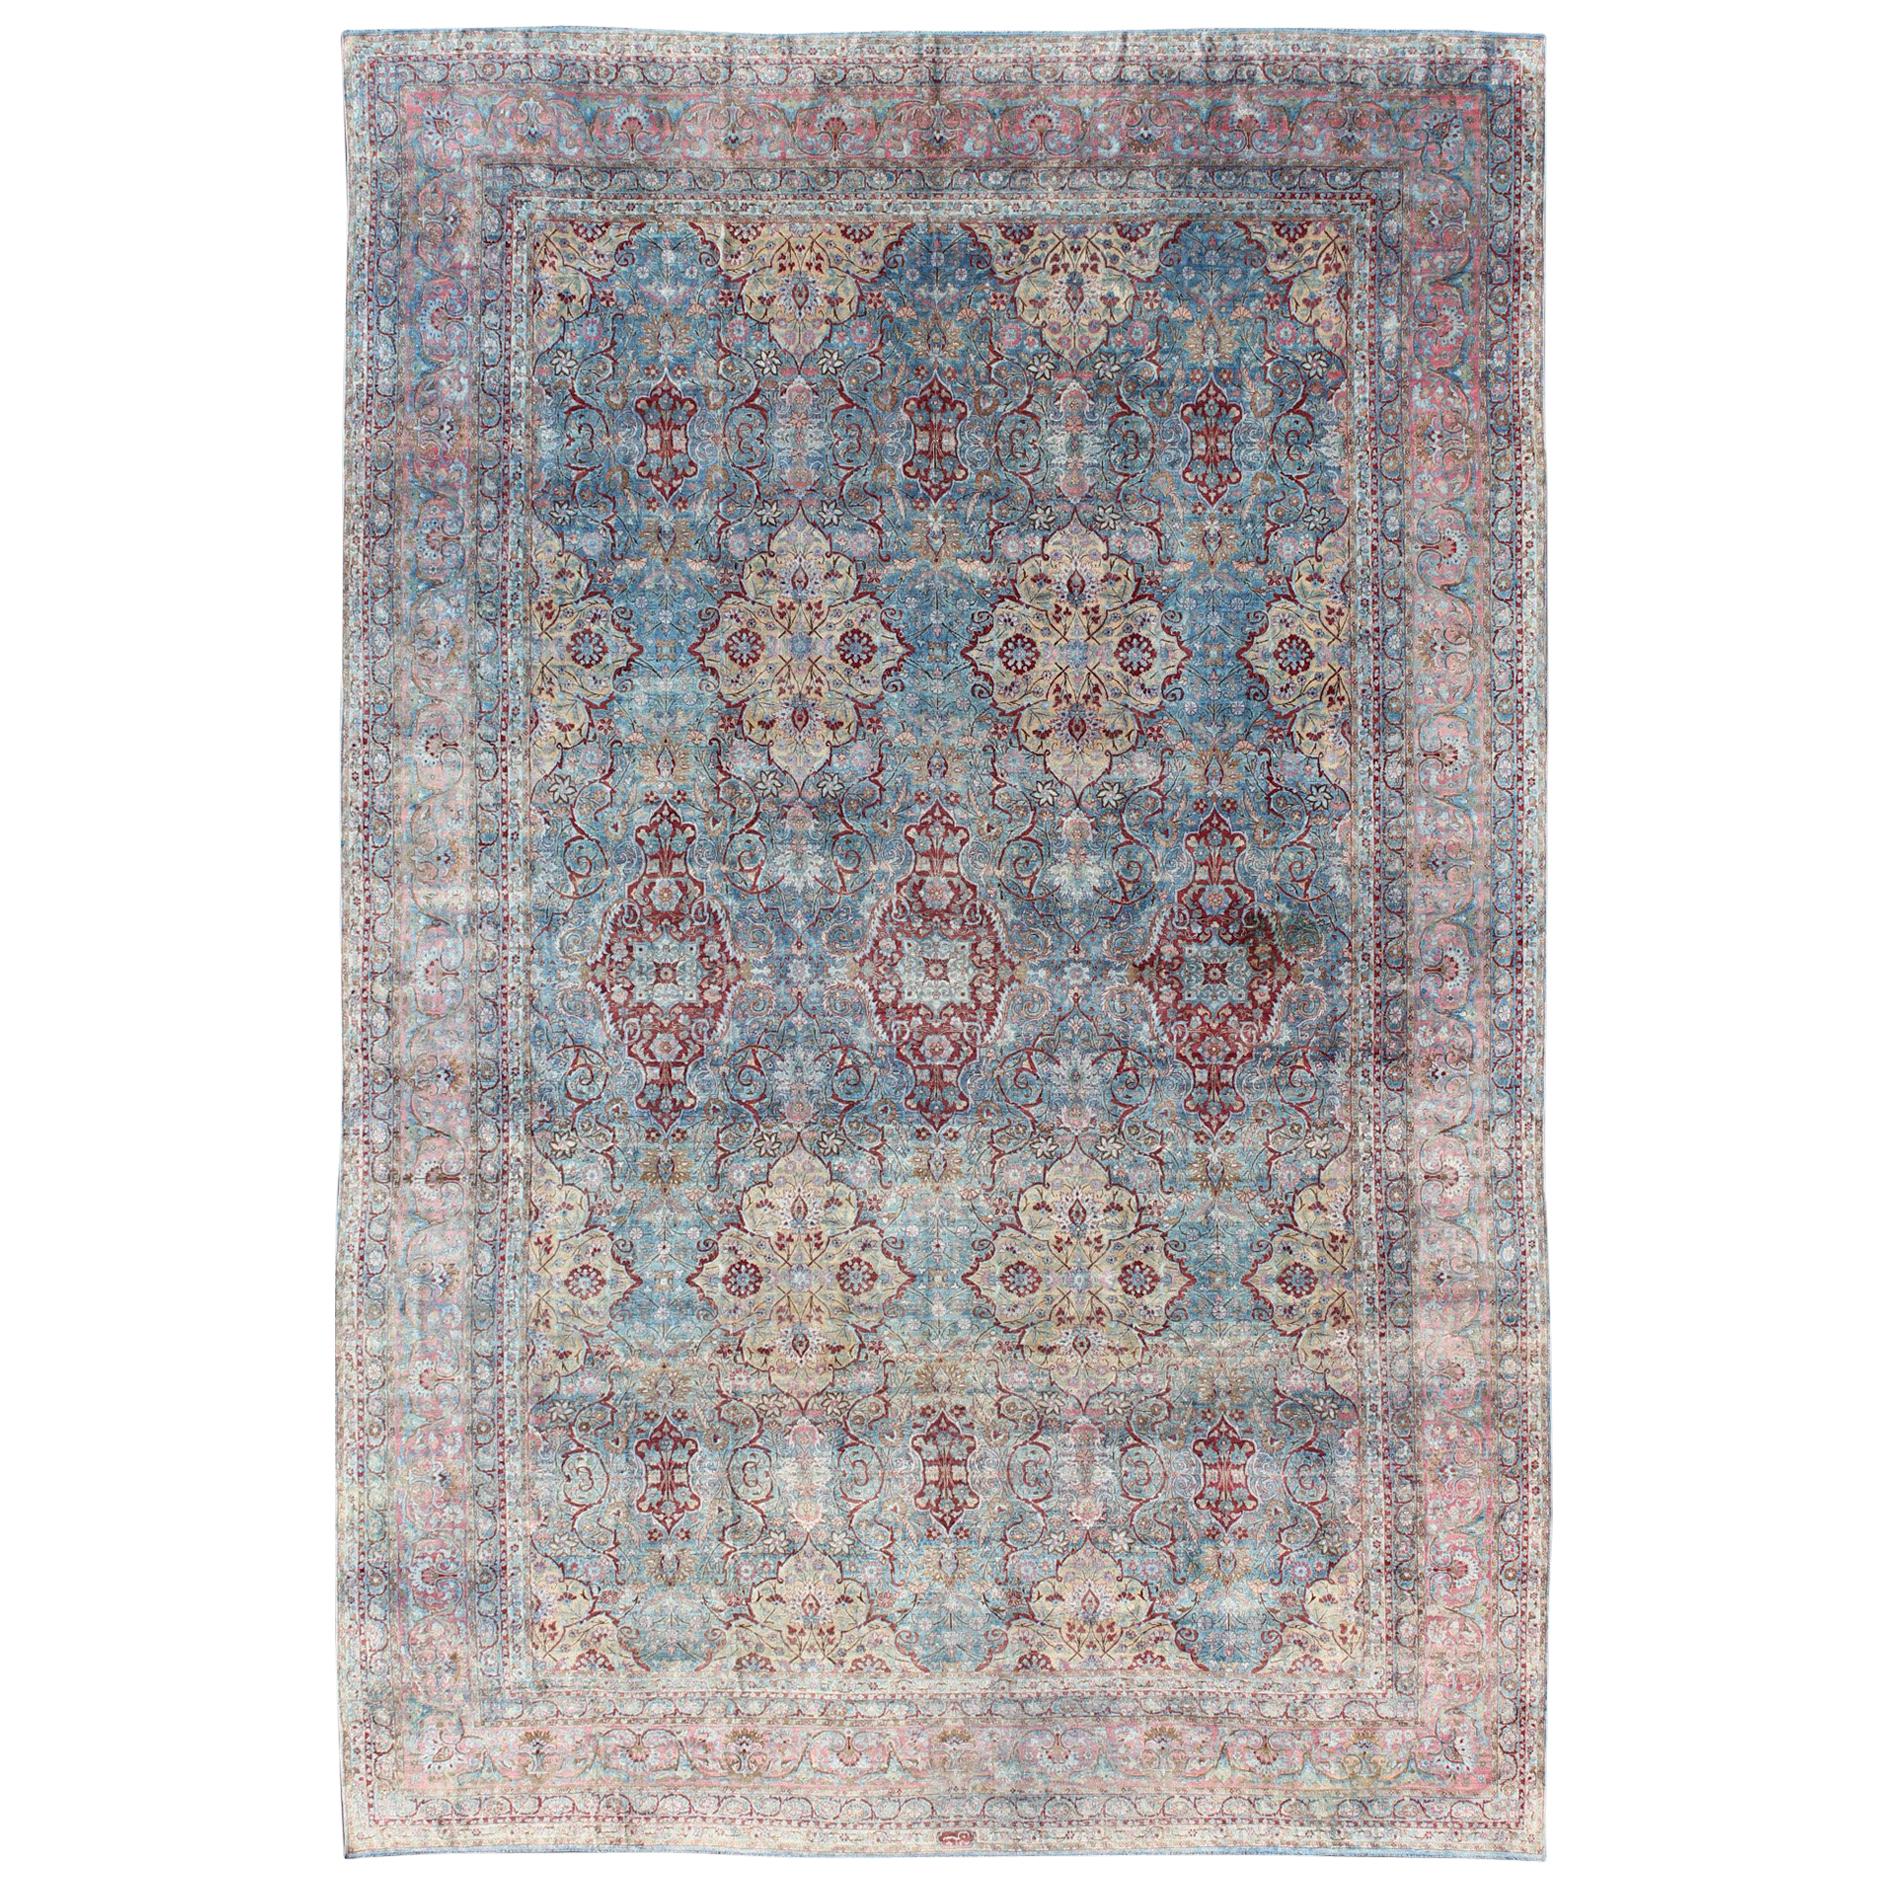 Large Antique Persian Kerman Rug with Medallions in Light Blue, Red and Pink For Sale